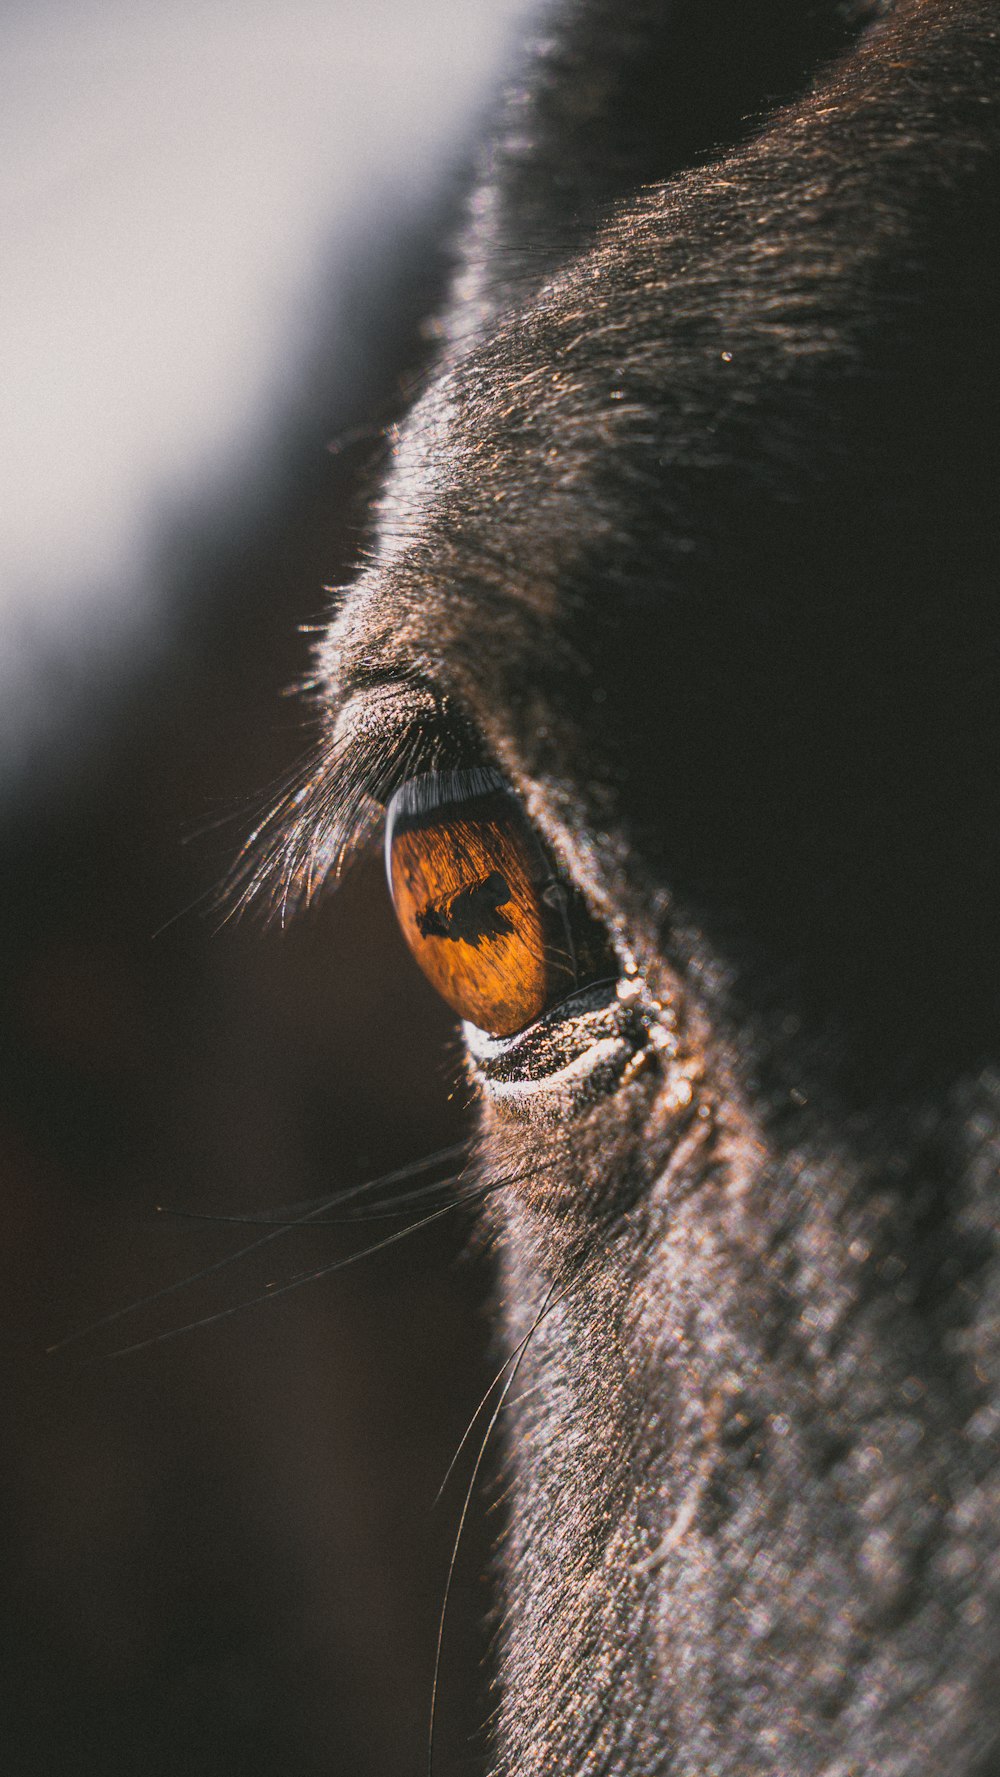 a close up of a dog's eye and nose